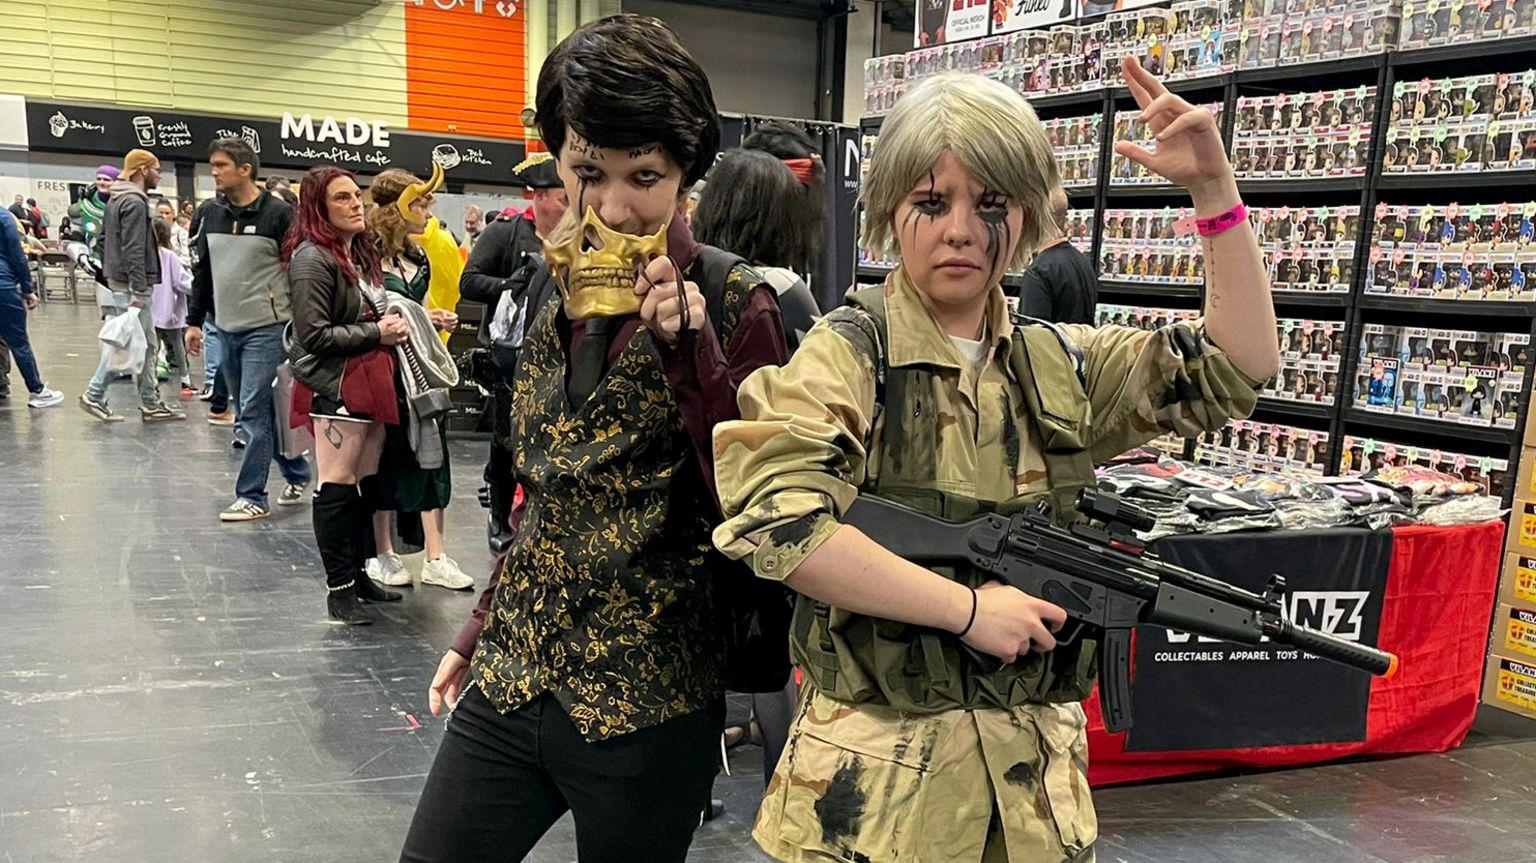 Birmingham C﻿omic Con expected to attract thousands BBC News